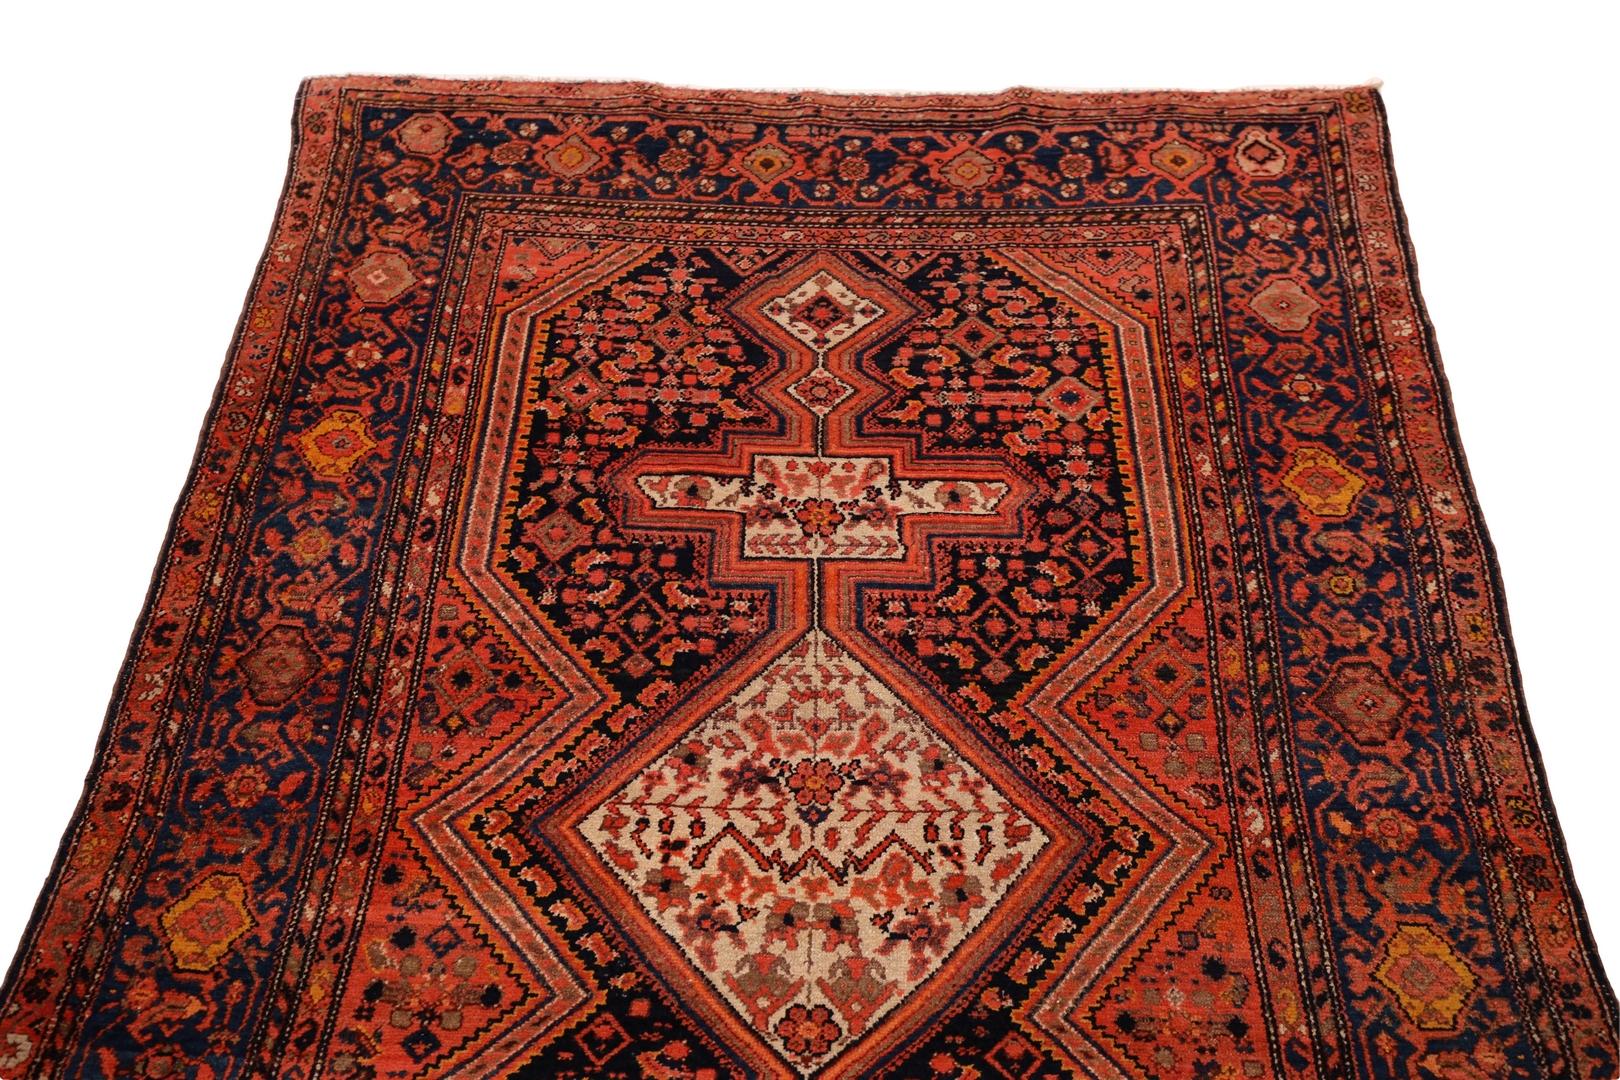 Hand-Knotted Malayer Antique Rug, Red Ivory - 4'6